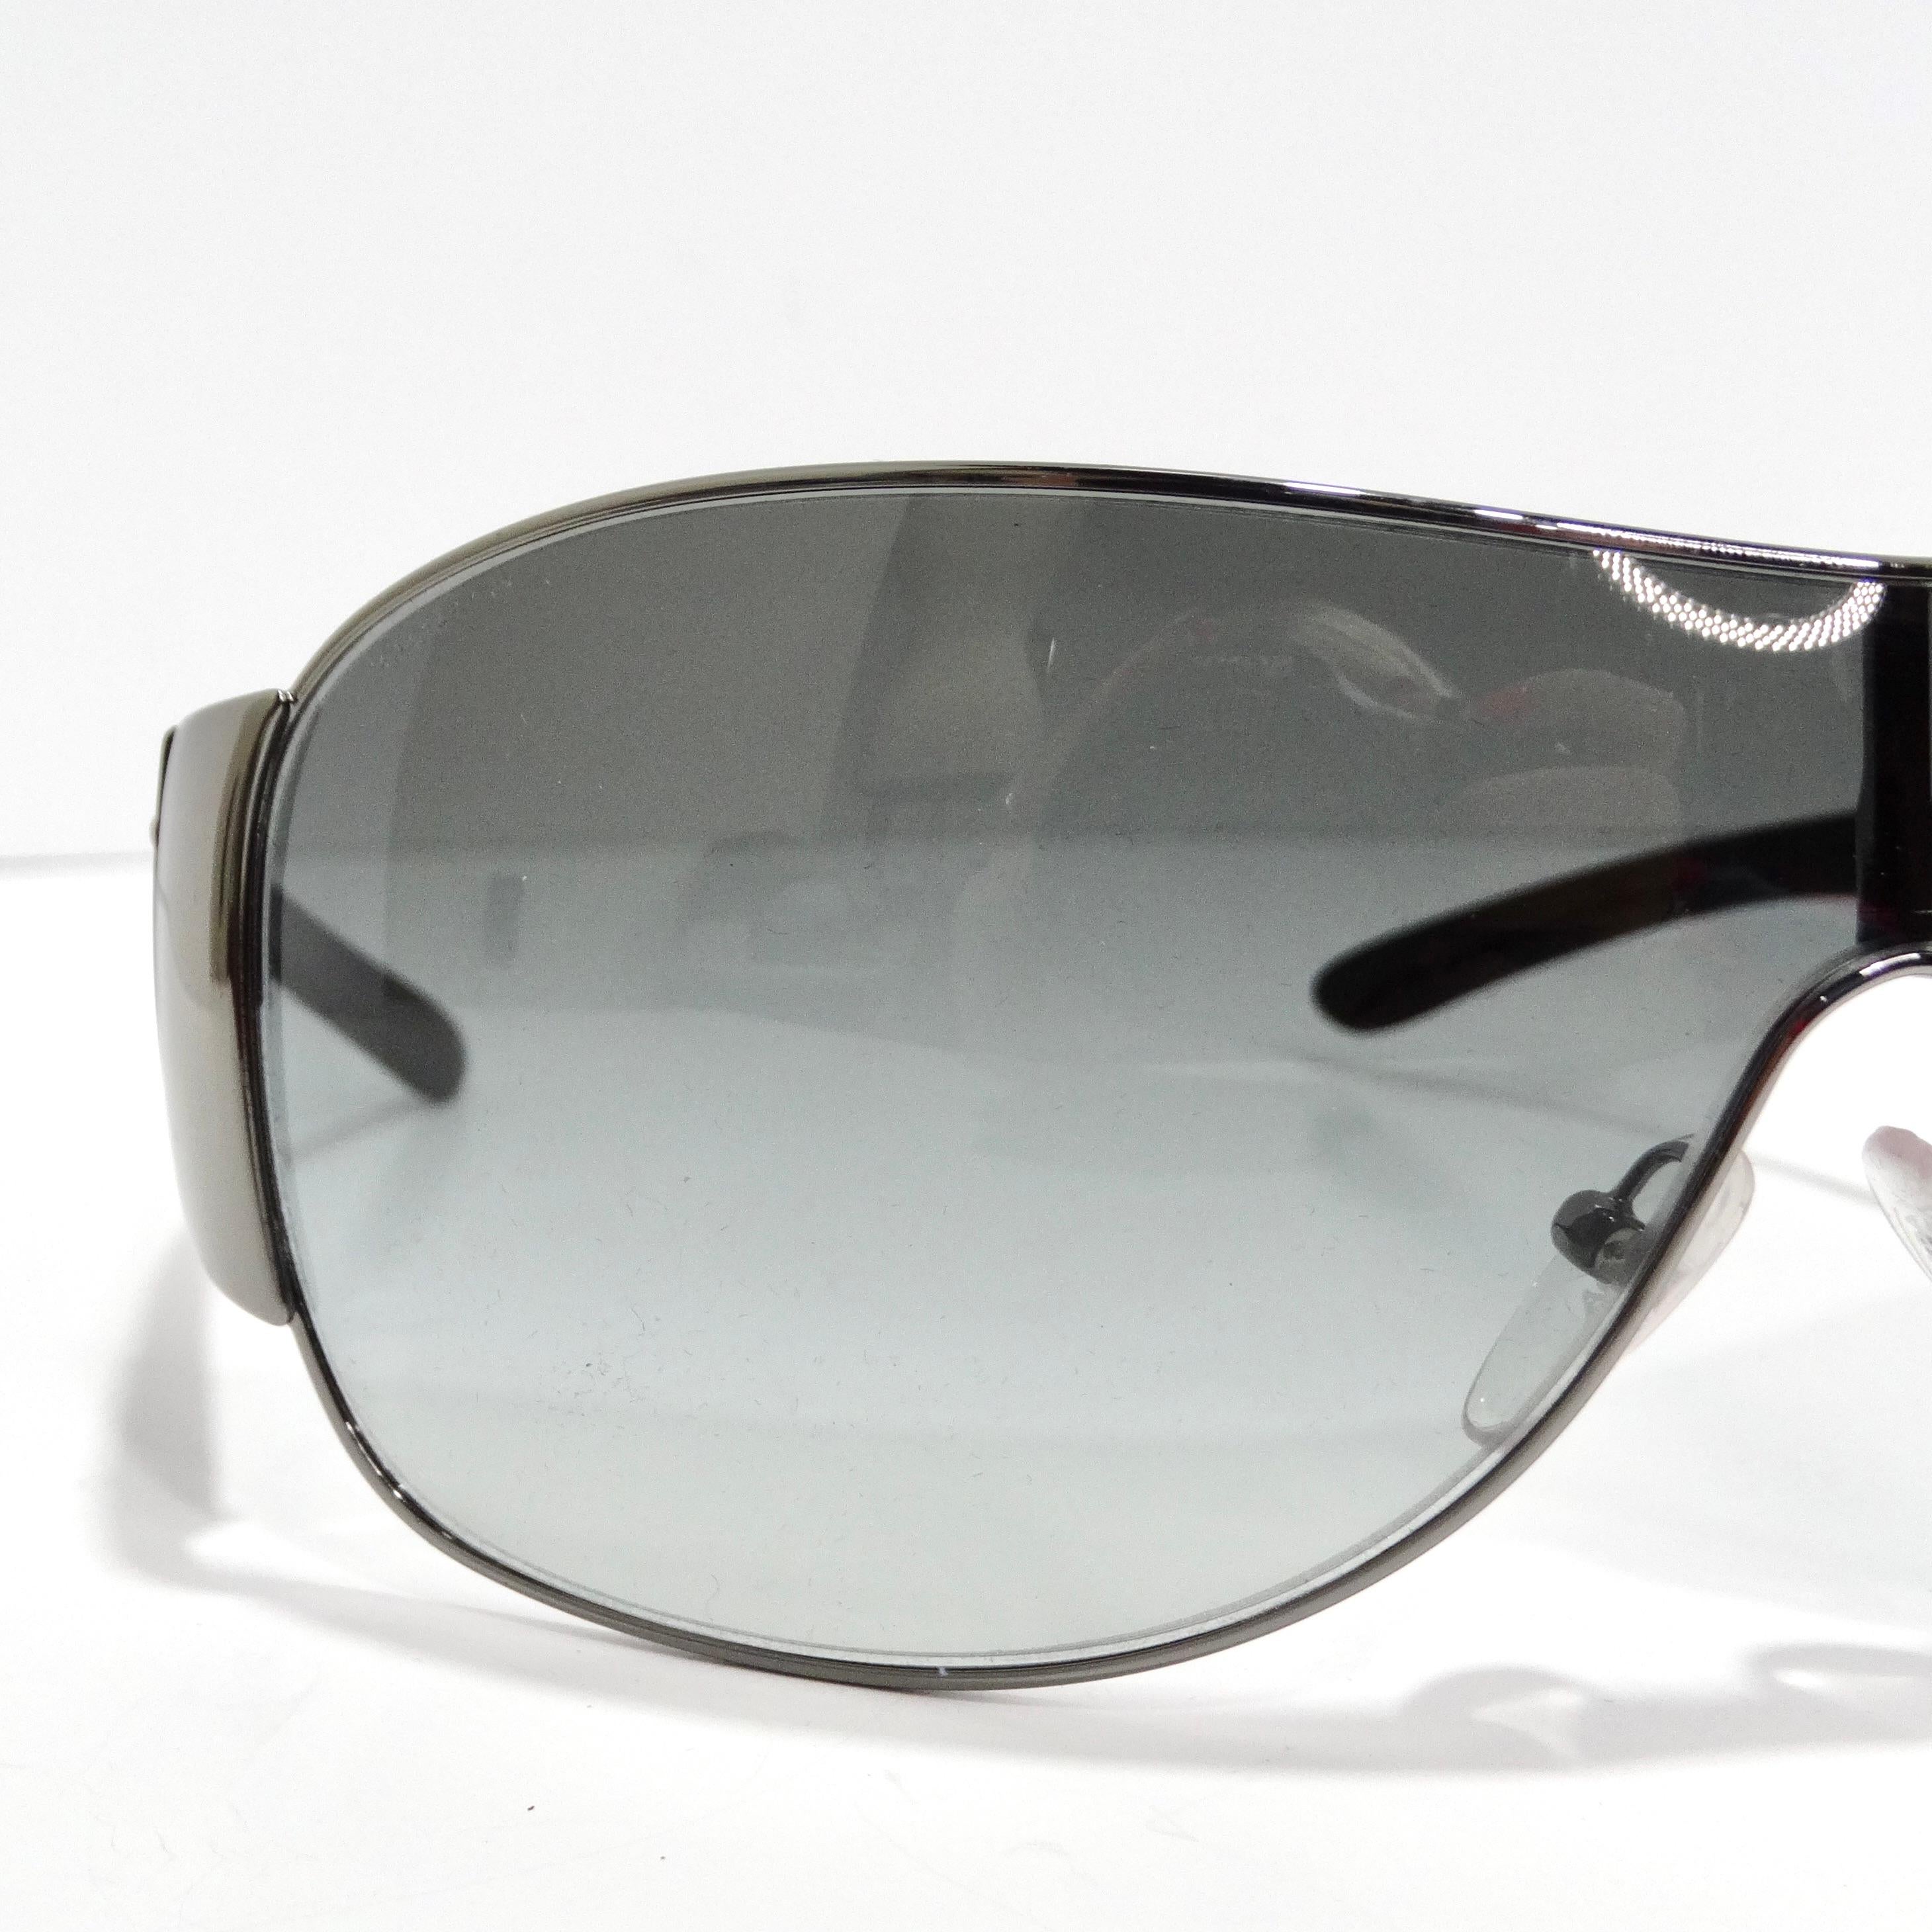 Step into the epitome of 1990s chic with the Prada 1990s Black Shield Sunglasses. These classic shield-style sunglasses boast thin silver-tone rims, sleek black arms adorned with silver-tone Prada logos, and blue-grey gradient lenses. The timeless